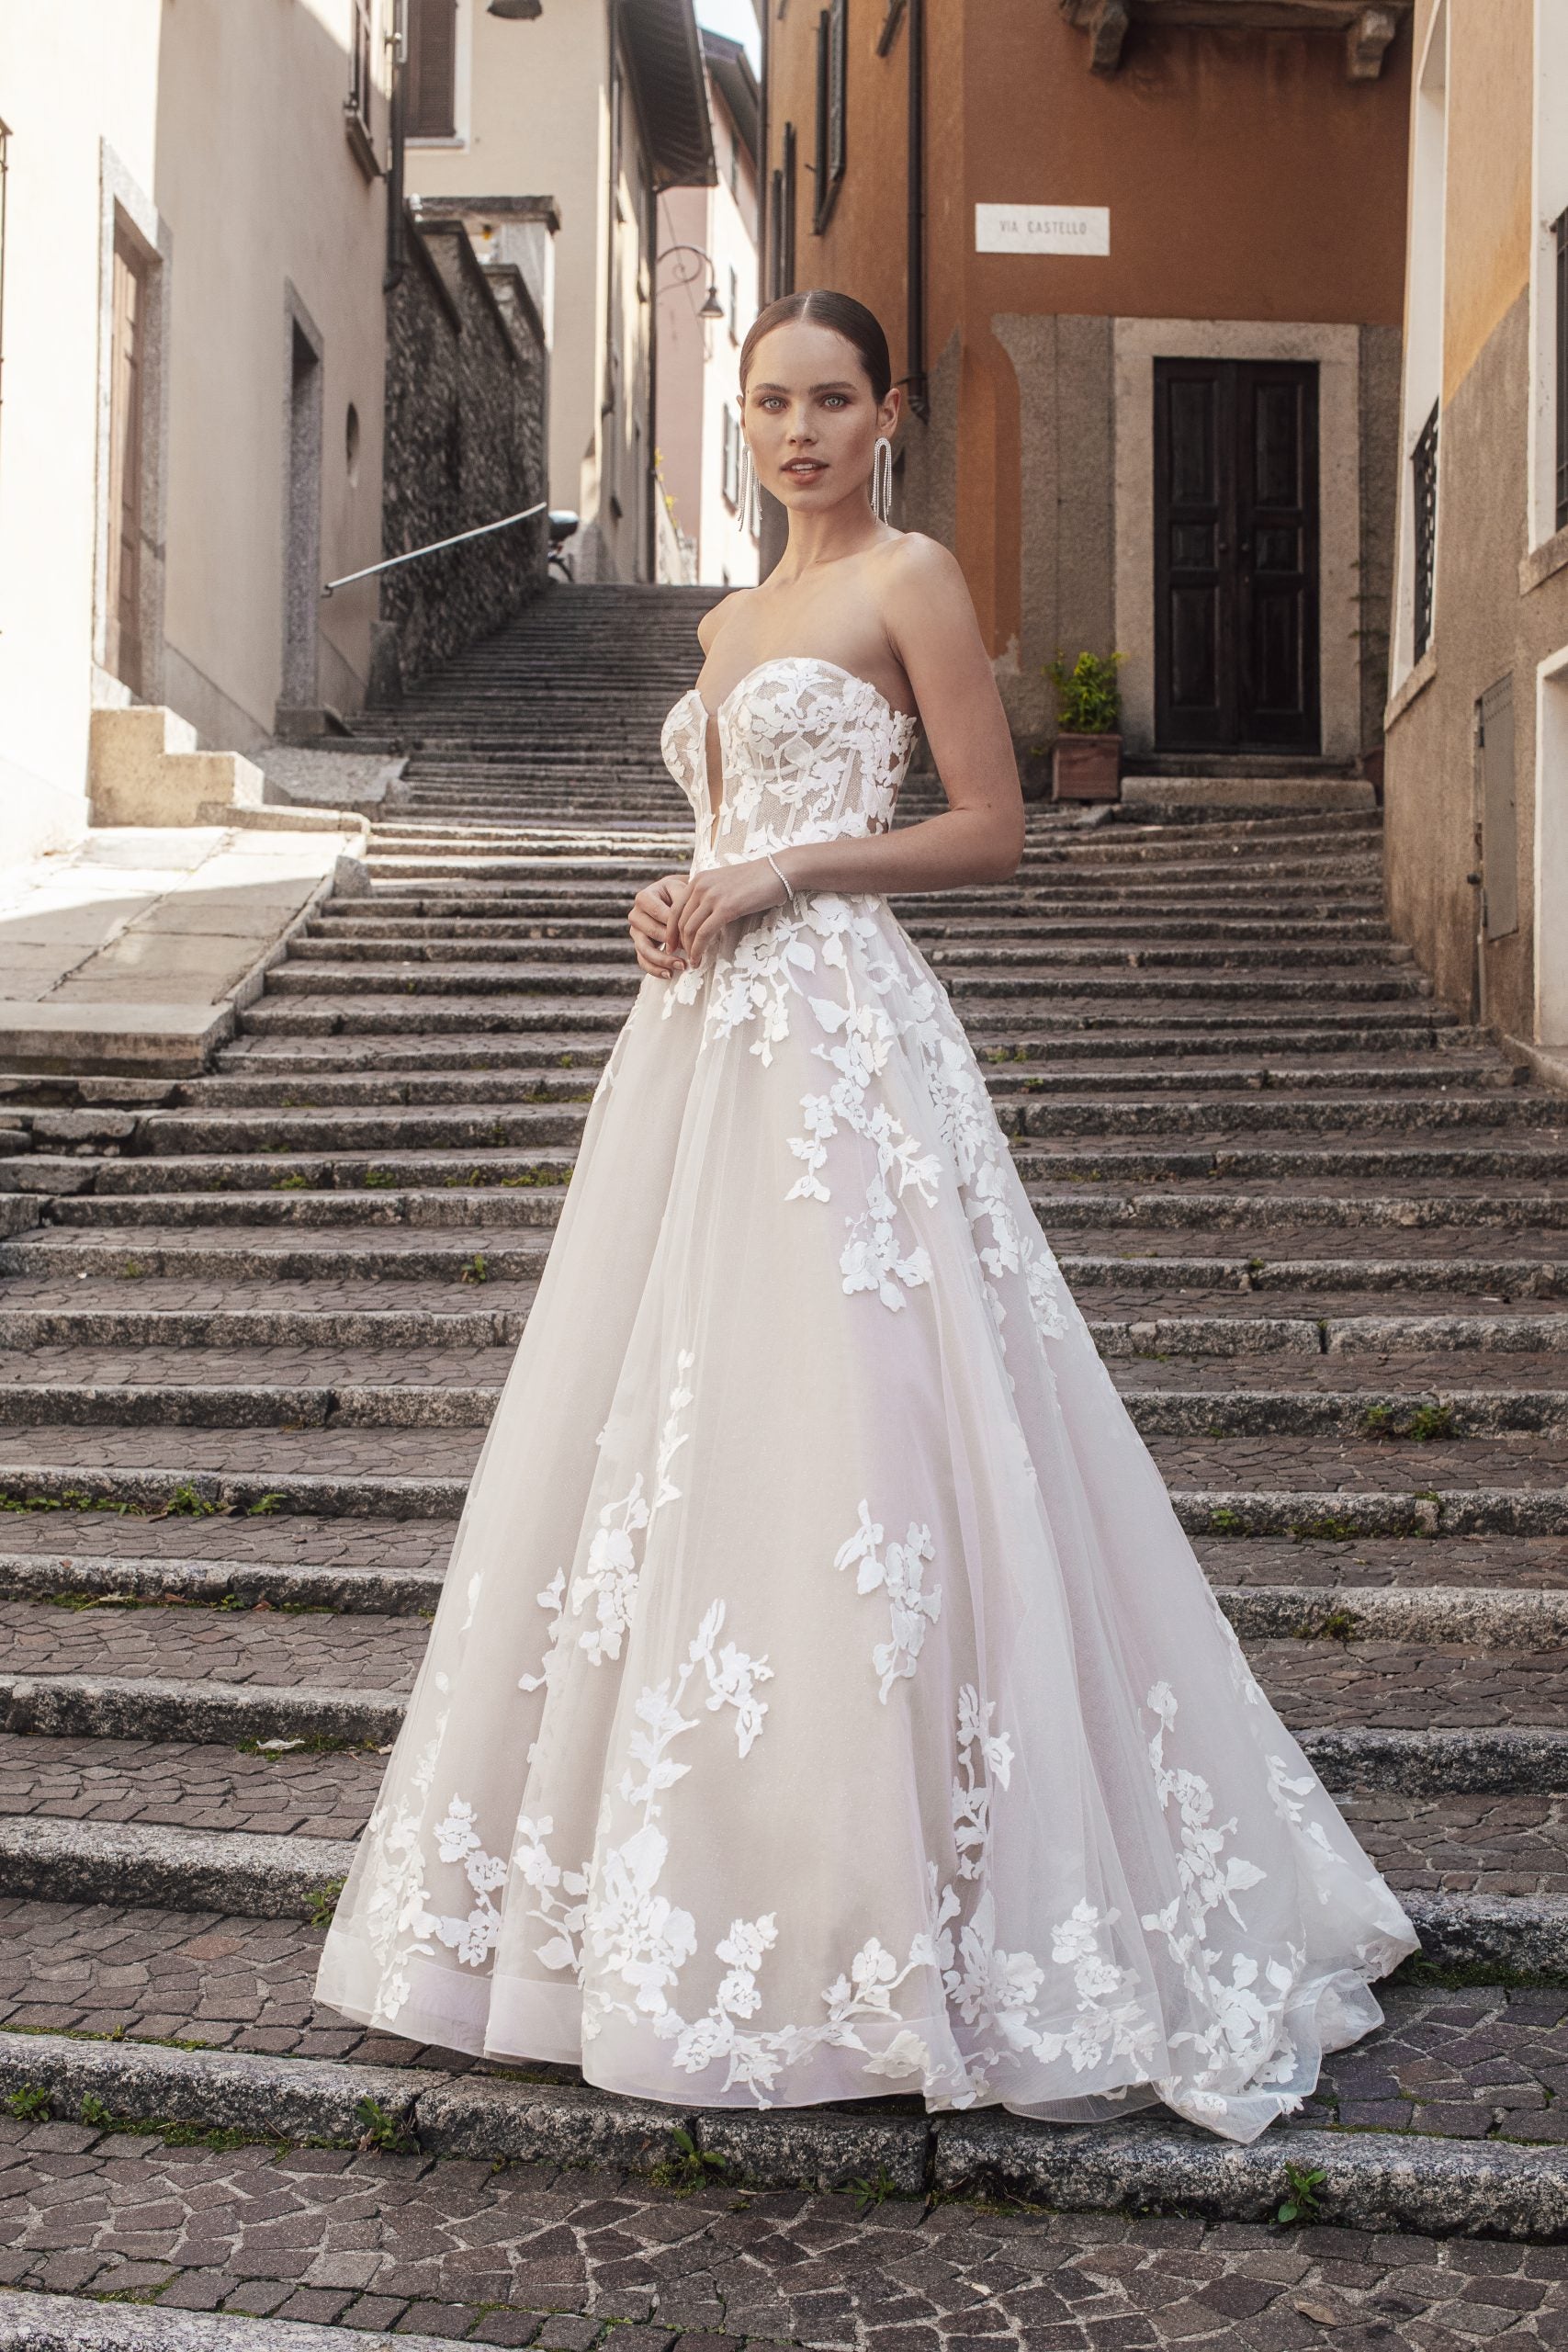 Romantic Floral A-Line Gown by Madison James - Image 1